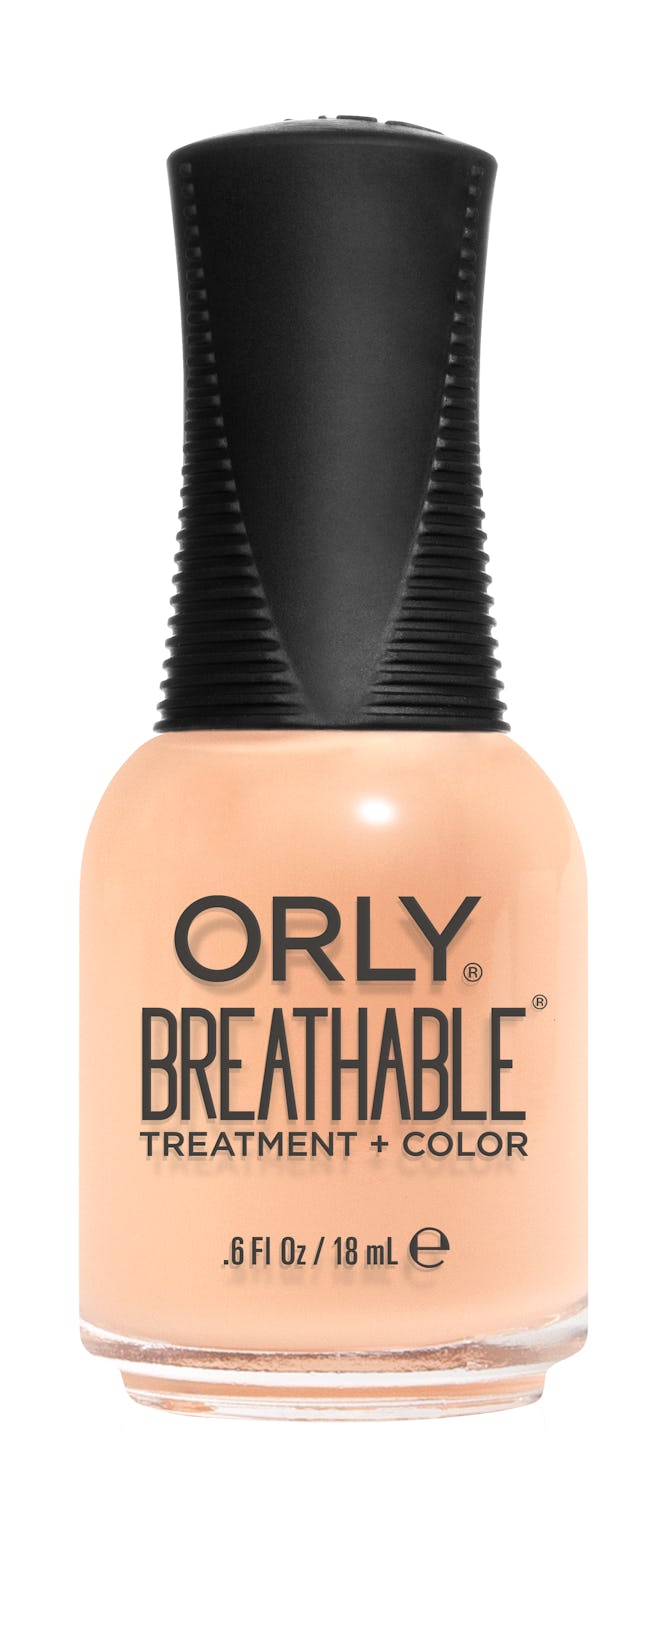 Breathable Treatment + Color in Peaches and Dreams